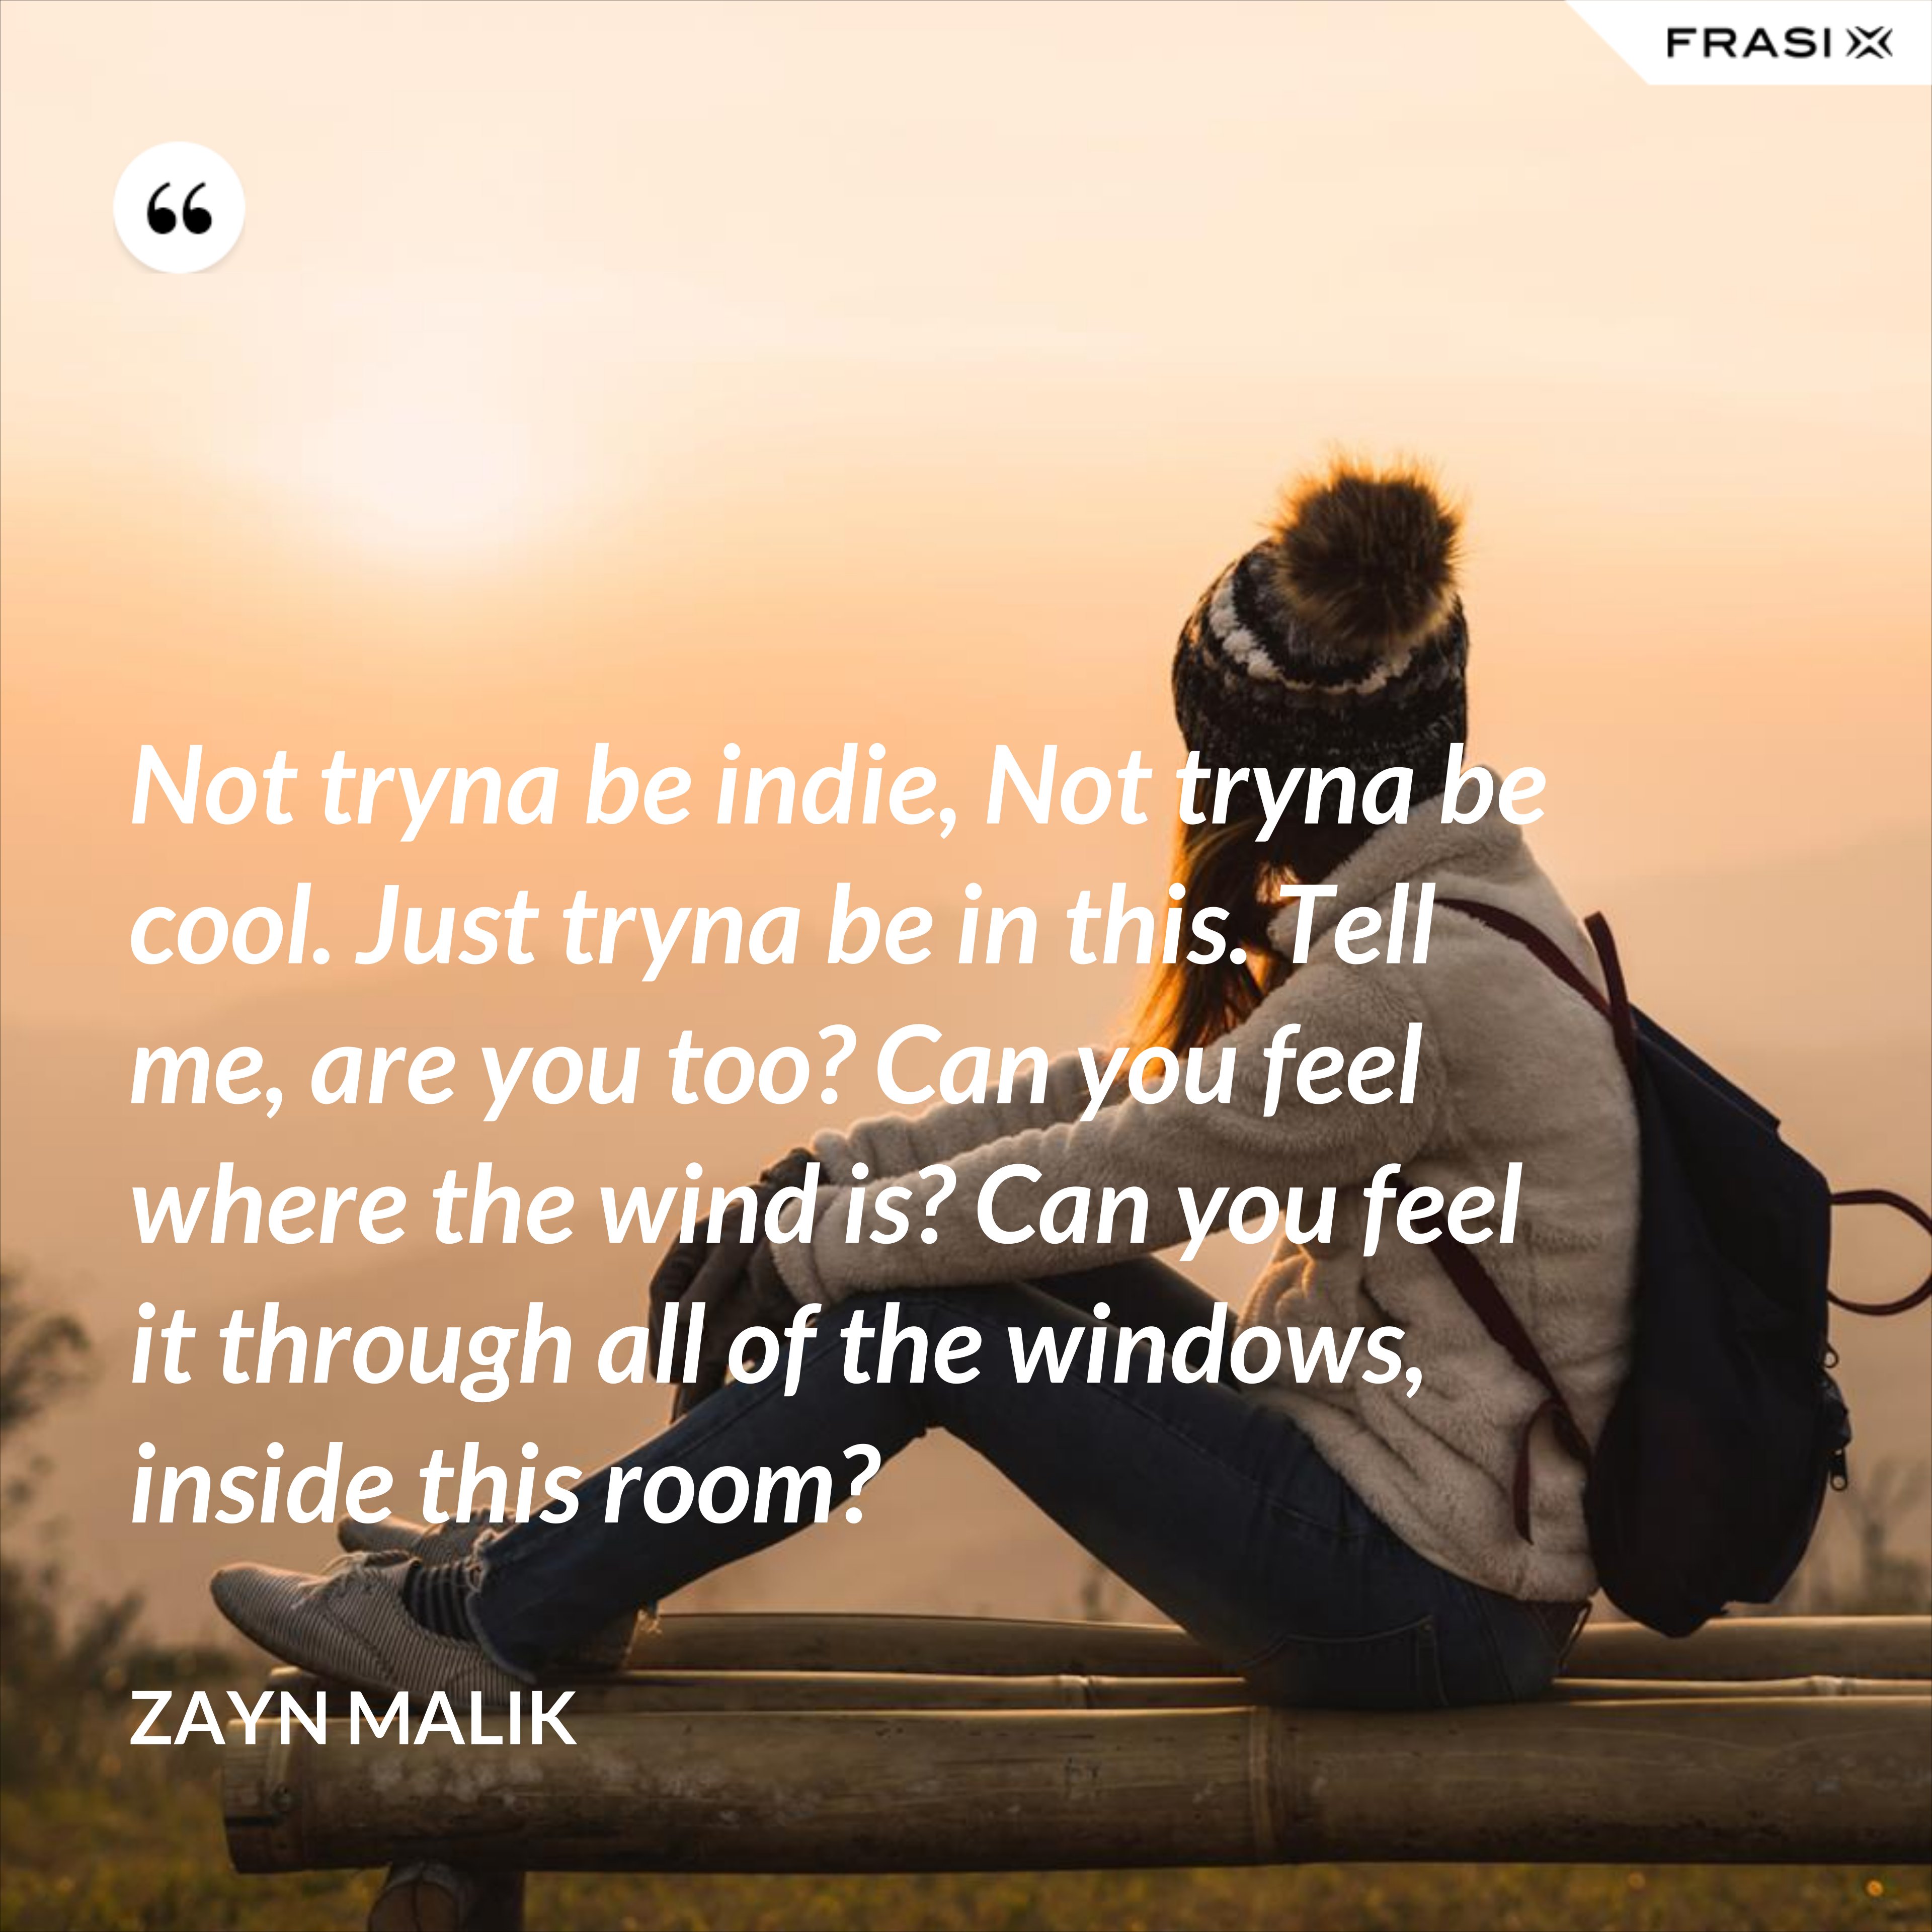 Not tryna be indie, Not tryna be cool. Just tryna be in this. Tell me, are you too? Can you feel where the wind is? Can you feel it through all of the windows, inside this room? - Zayn Malik